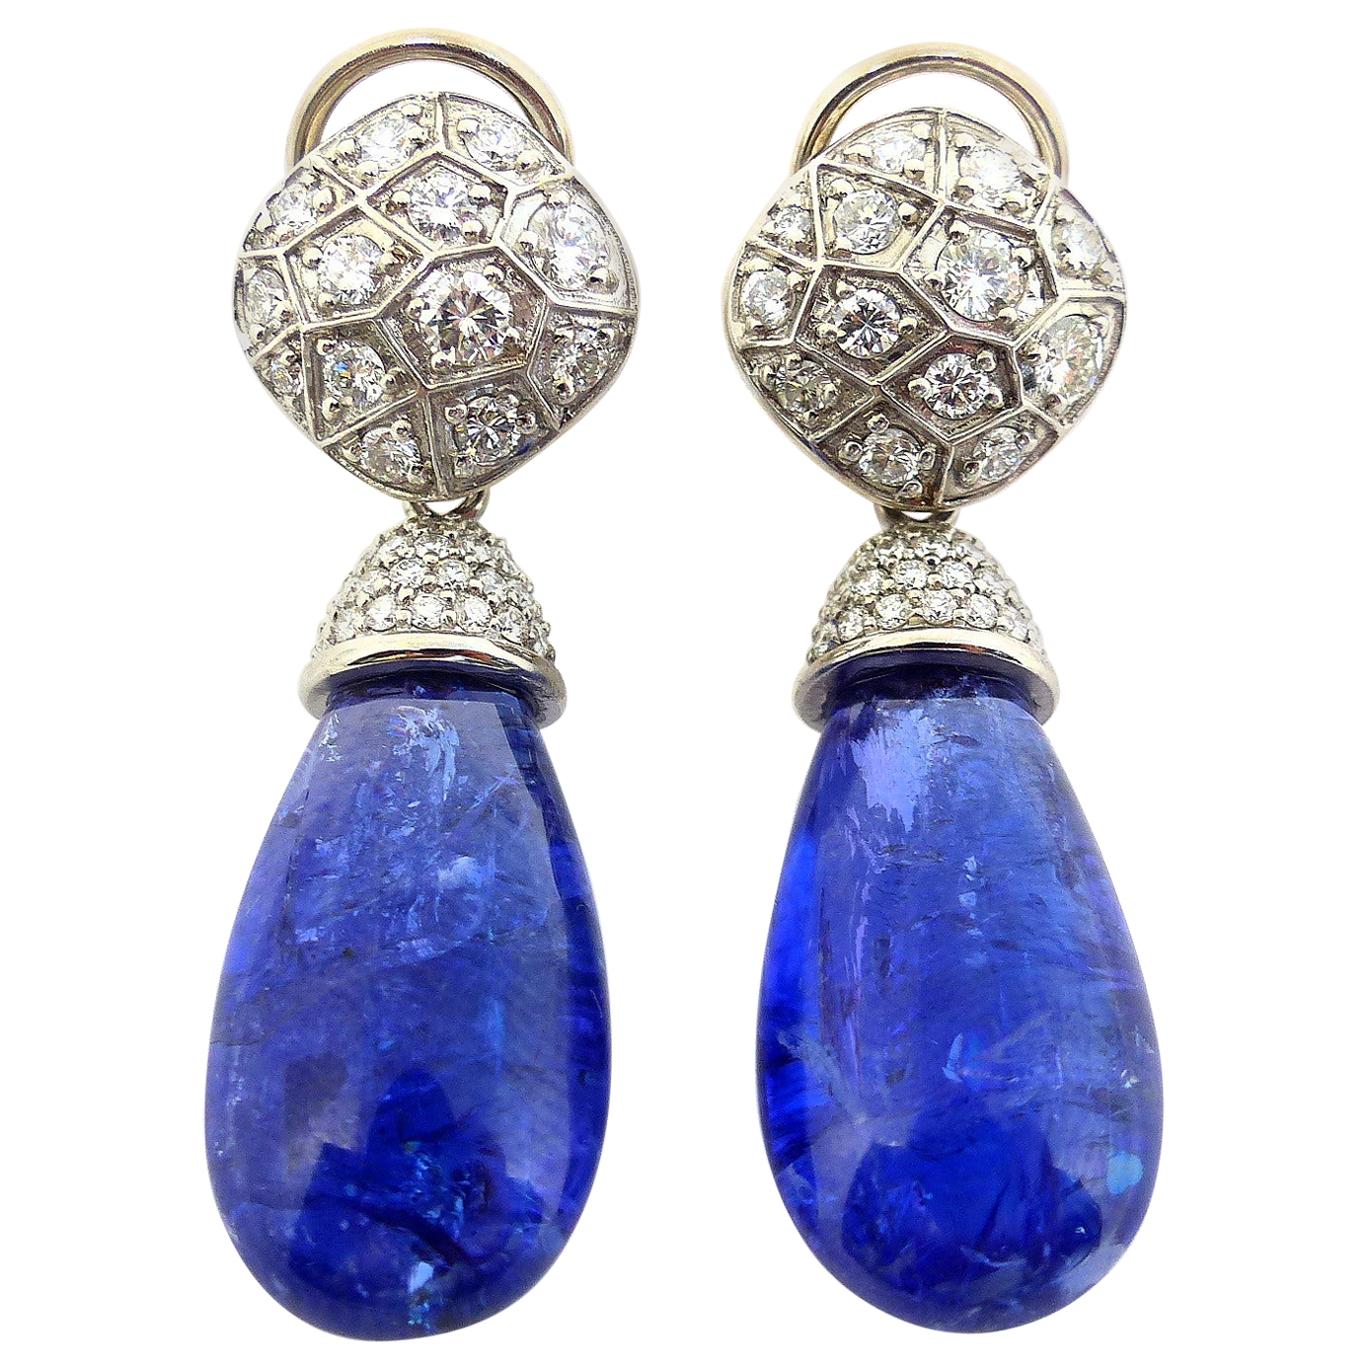 Earrings in White Gold with 2 Tanzanite Brioletts 41, 11ct. and Diamonds.